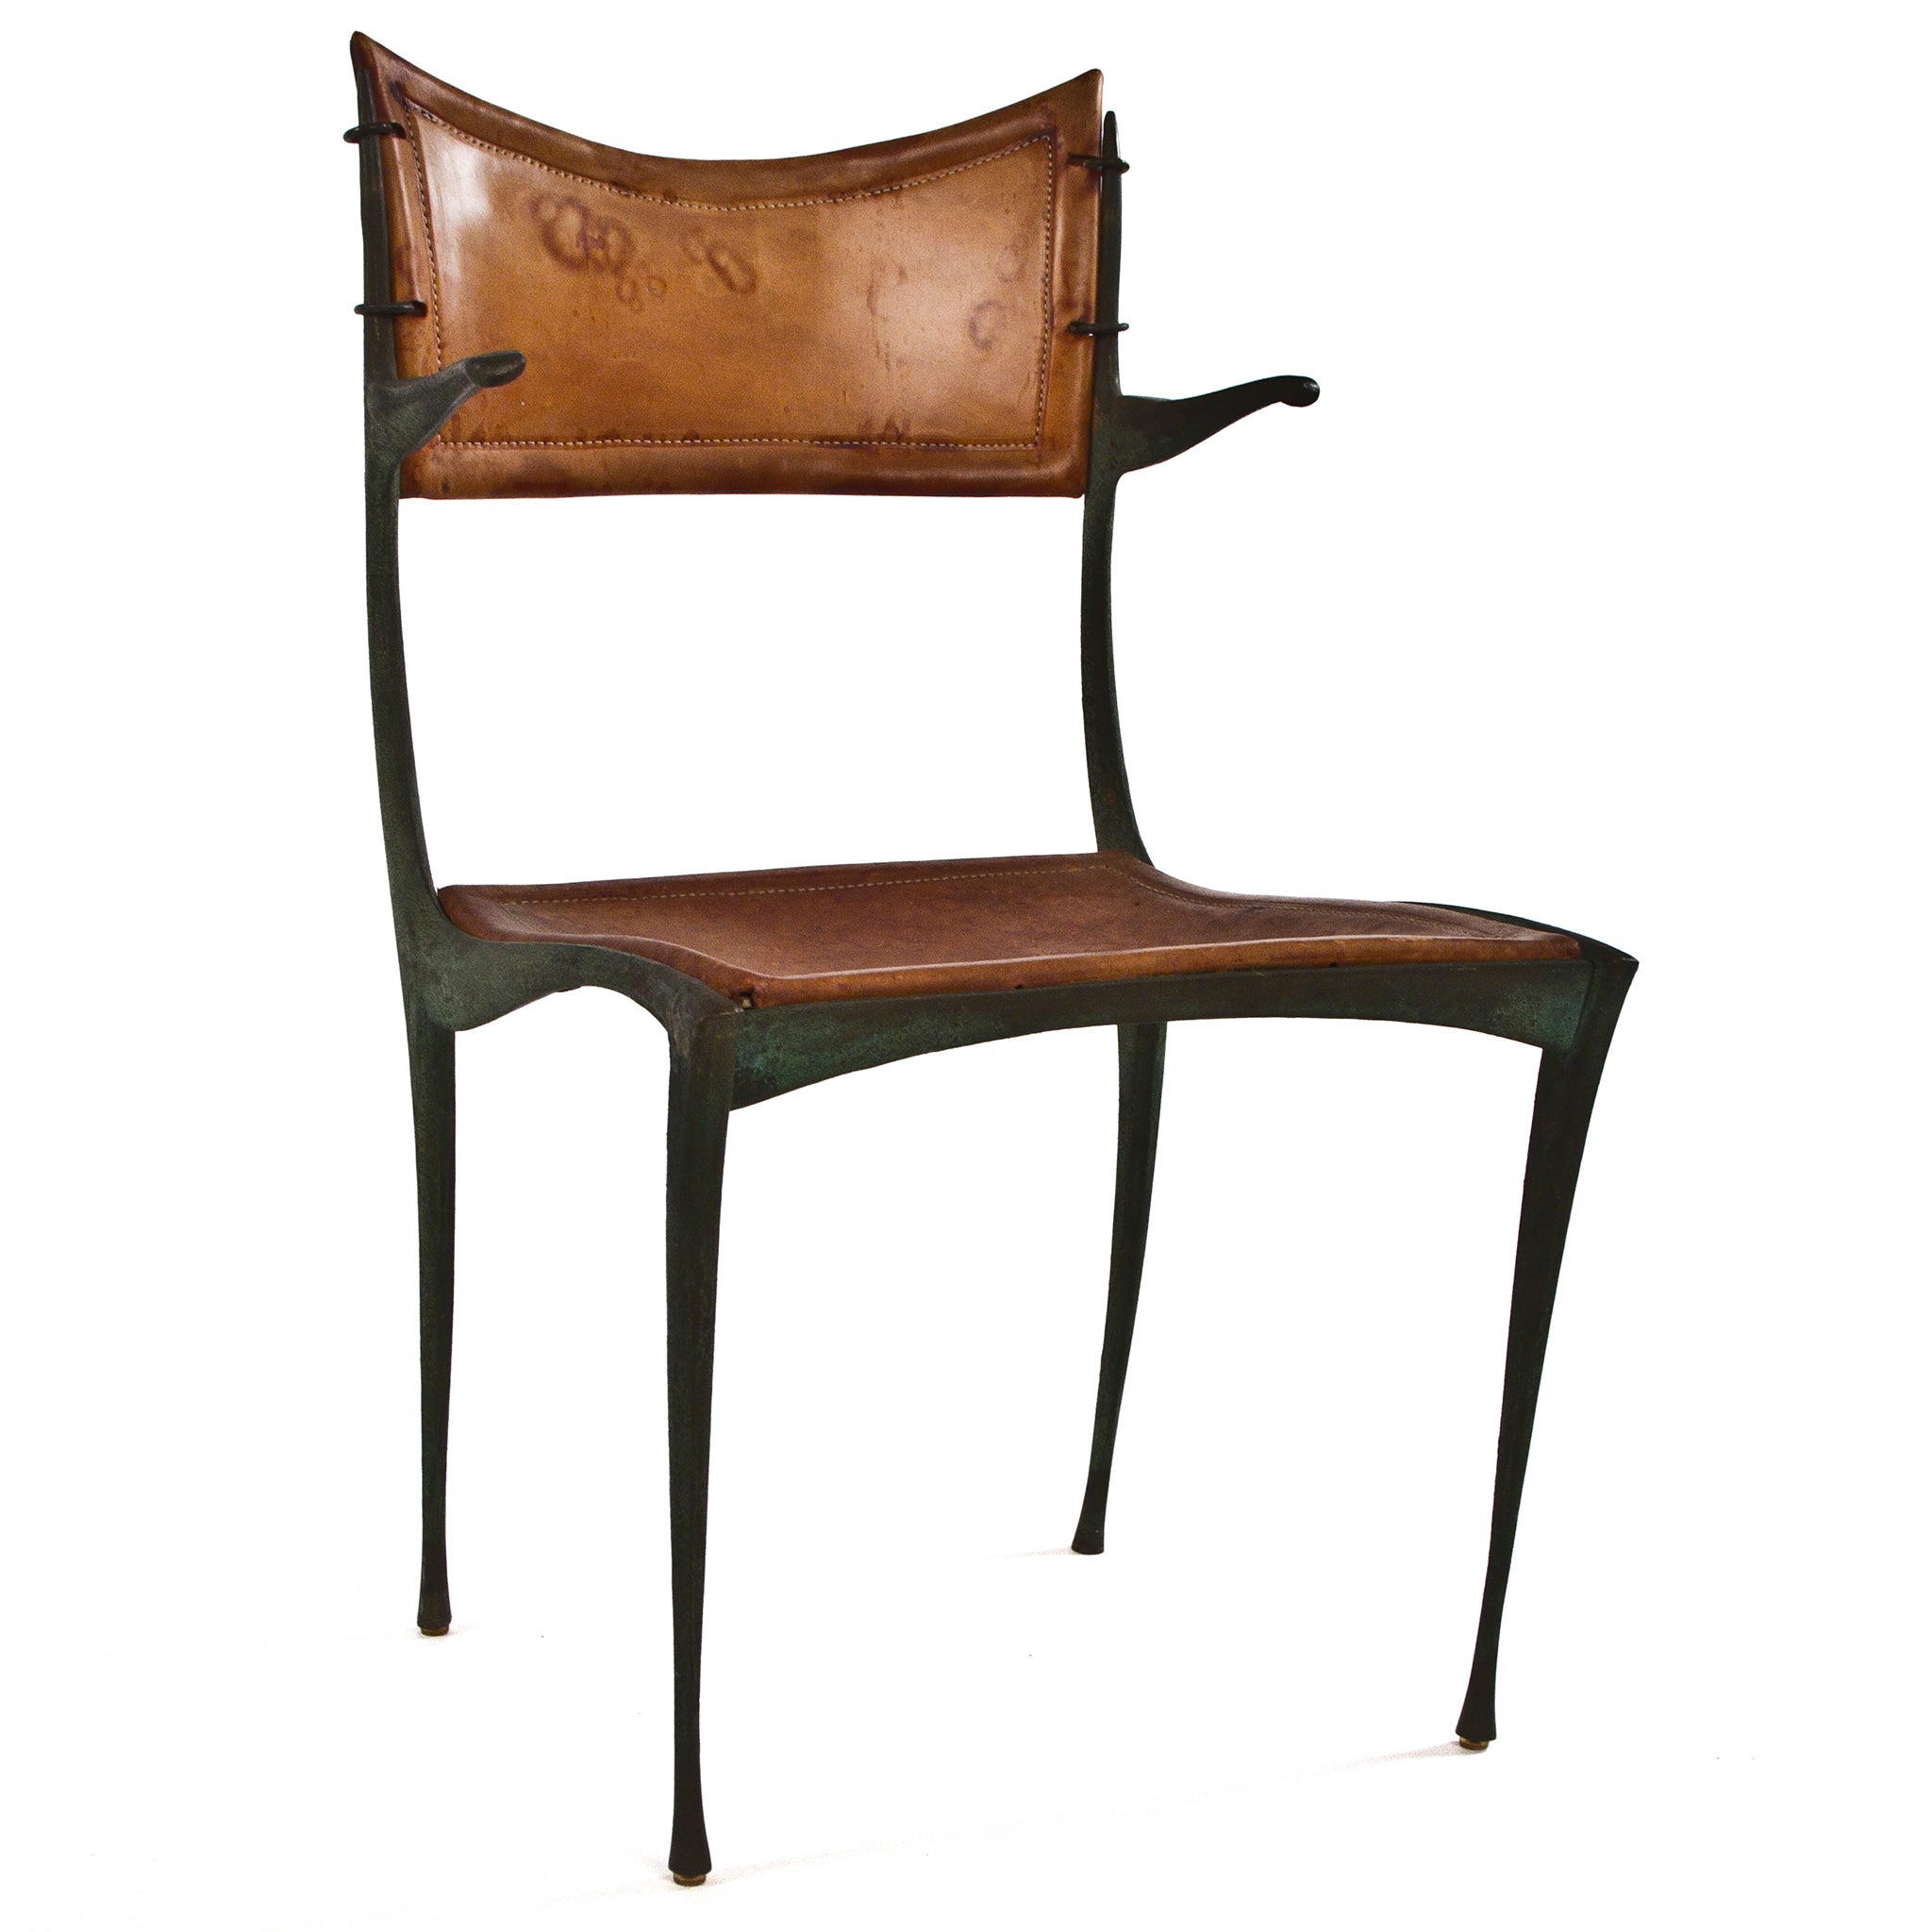 Bronze and leather Gazelle chairs - Dan Johnson